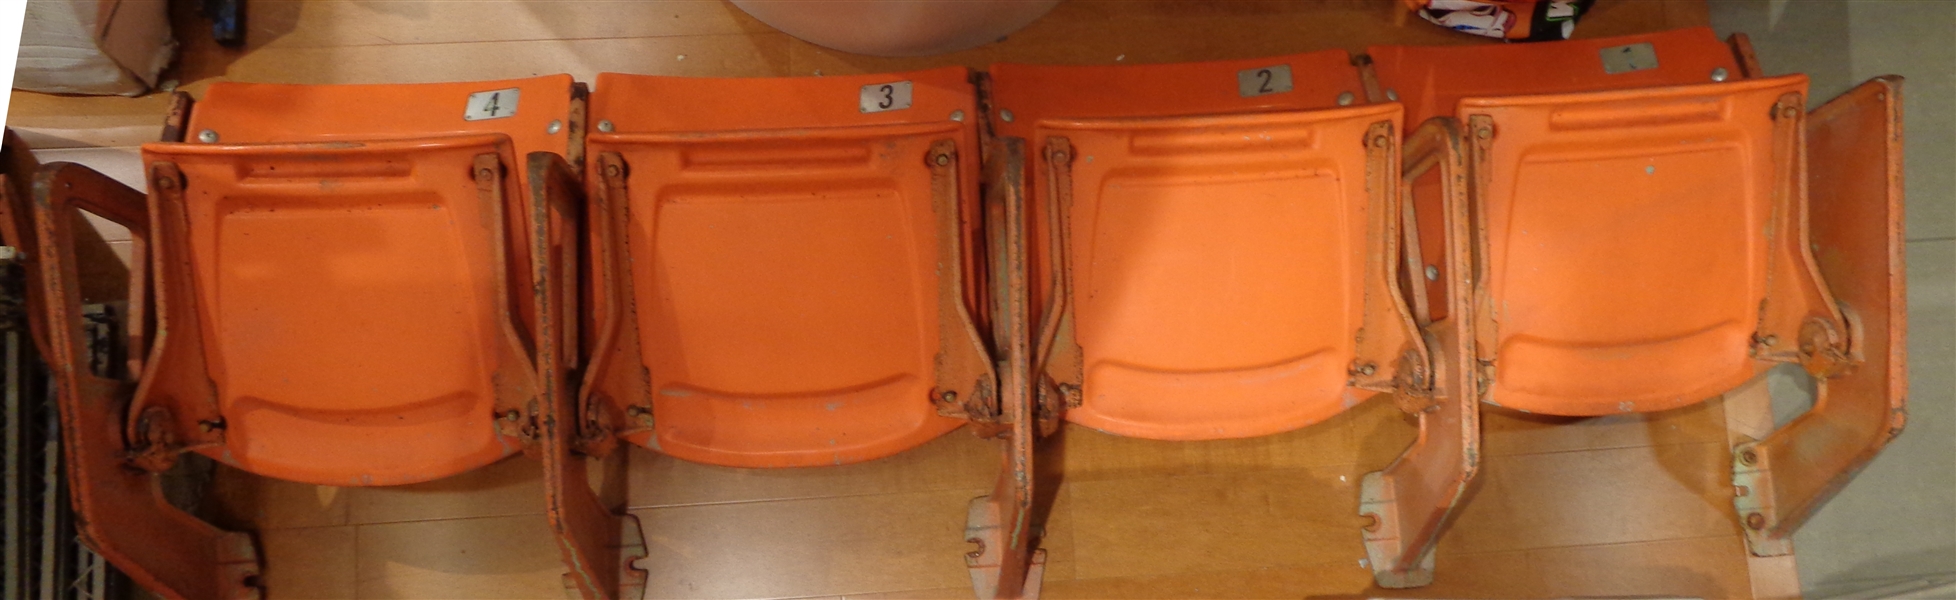 Tiger Stadium Row of 4 Chairs (Pick up only)